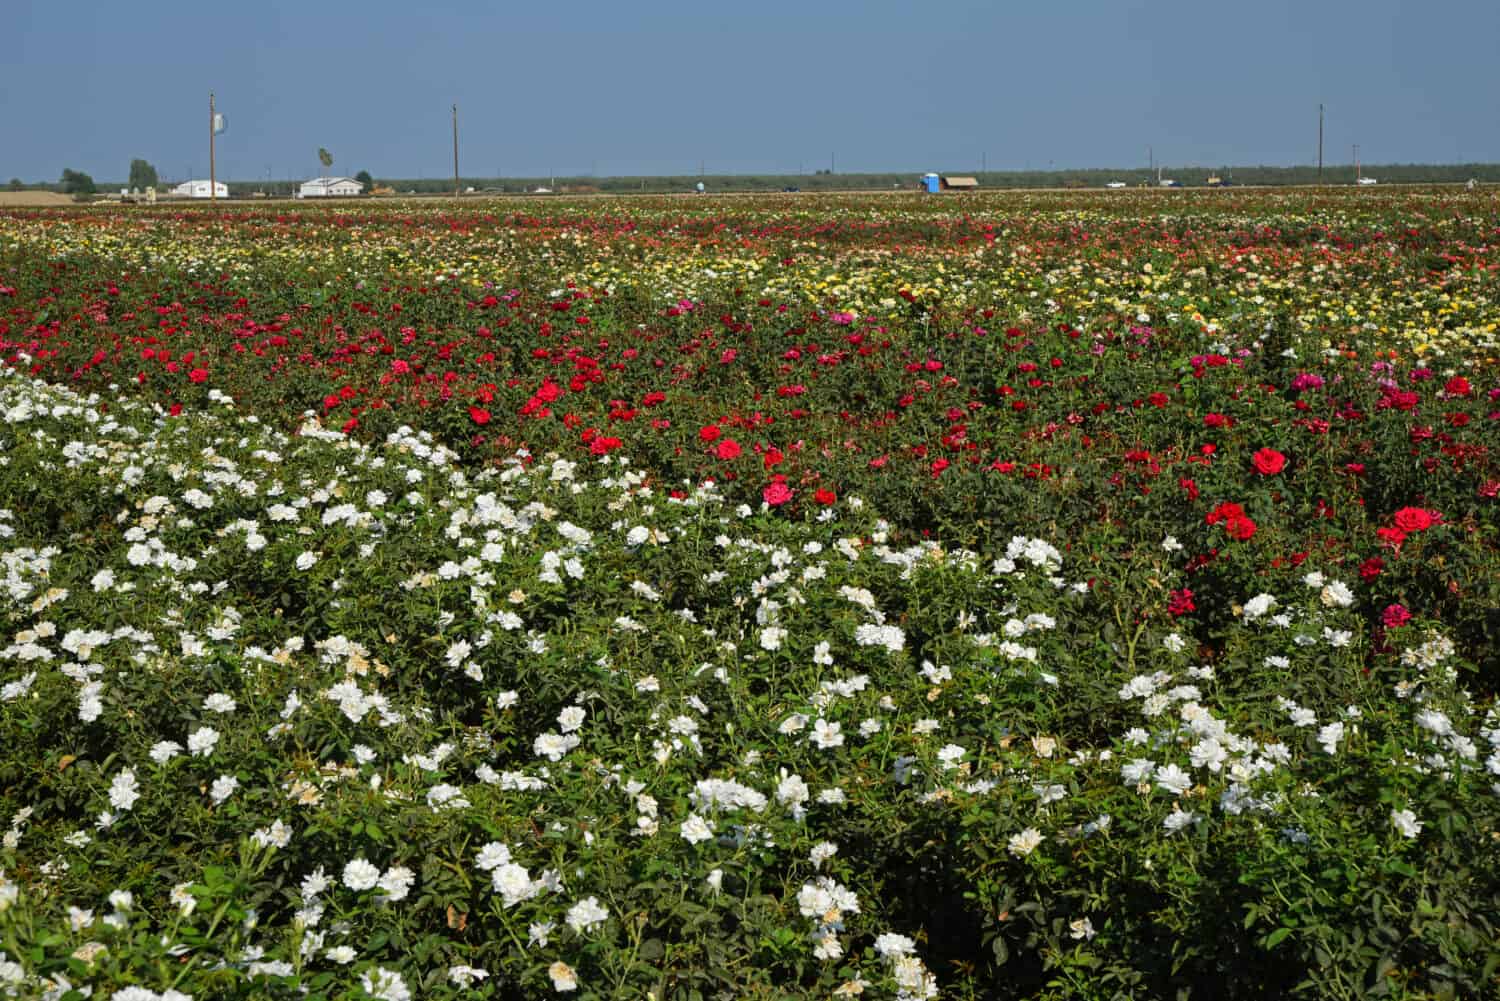 Vast fields of commercially-grown roses in and around Wasco, located in the Southern San Joaquin Valley, California, will soon be shipped to retail florists nationwide.